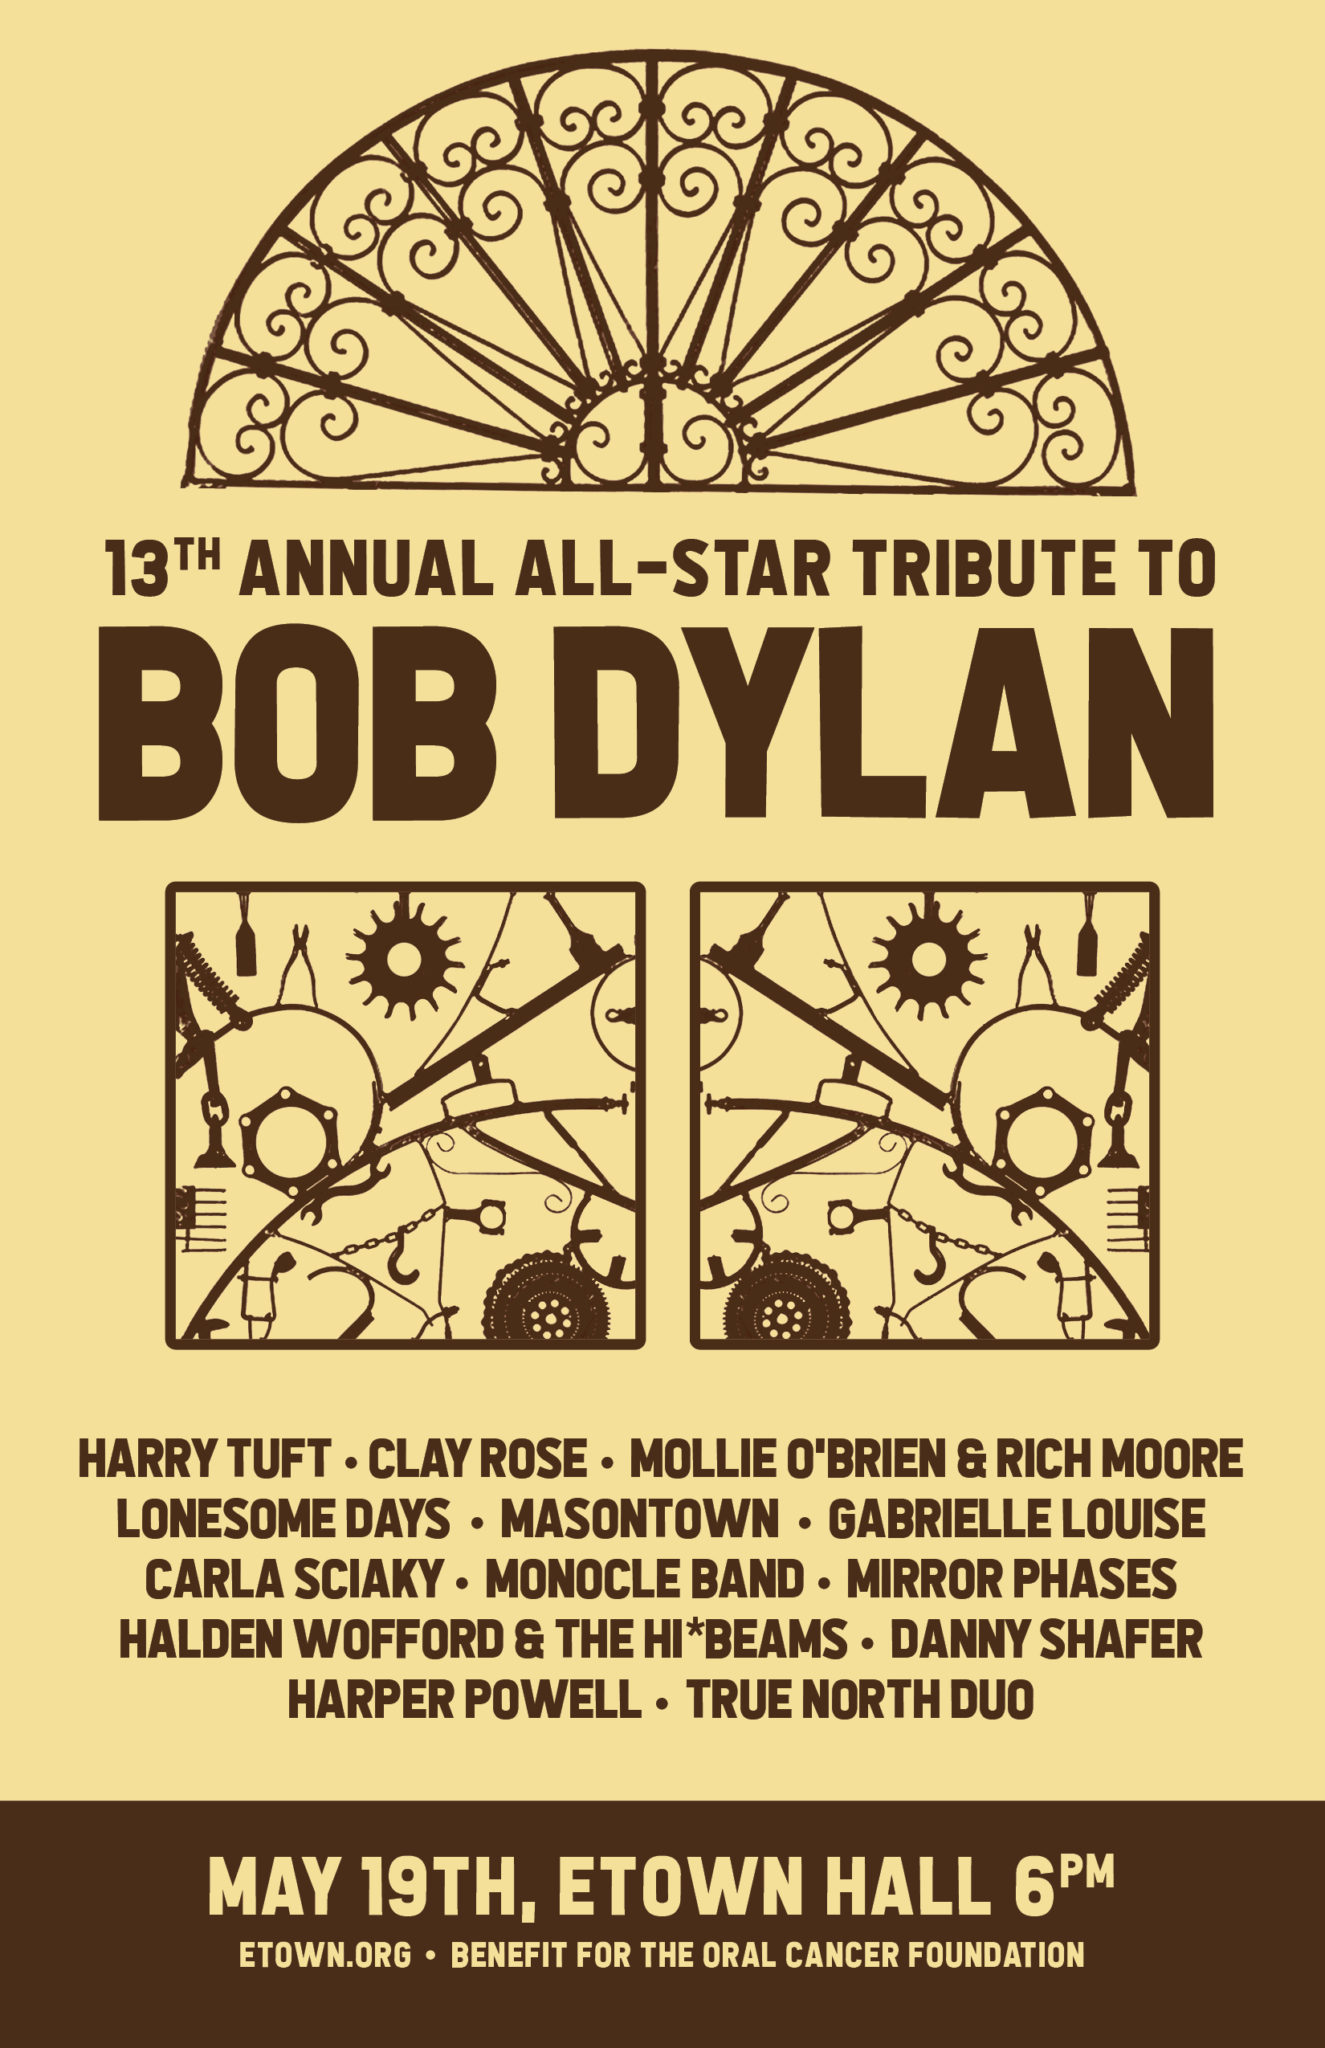 13th Annual All-Star Tribute to Bob Dylan - eTown